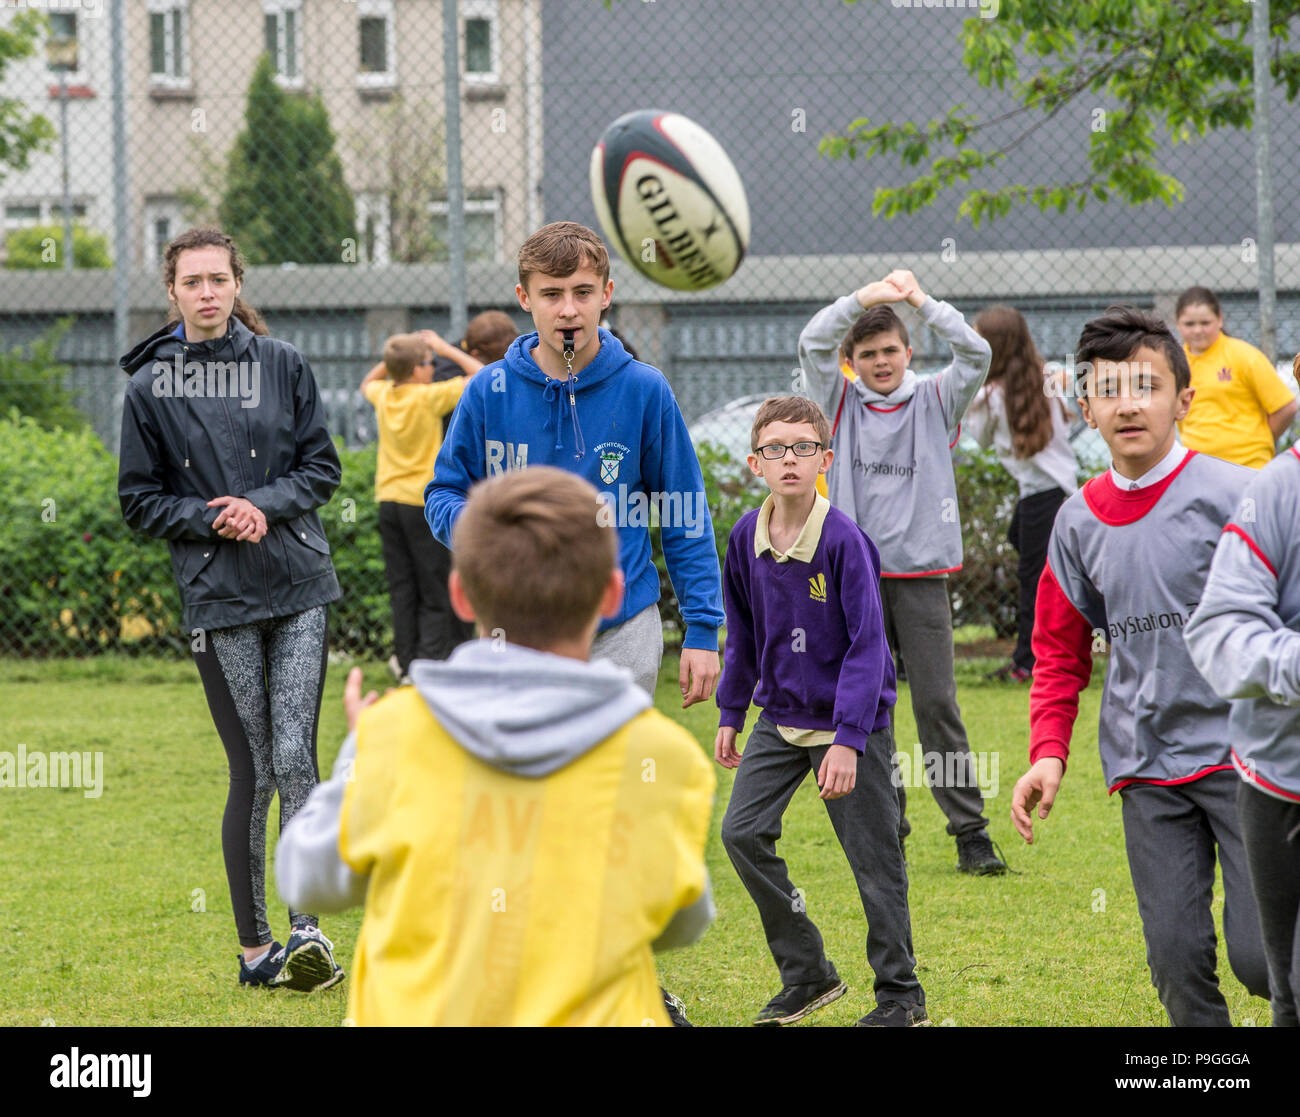 Young people participating in sports Stock Photo